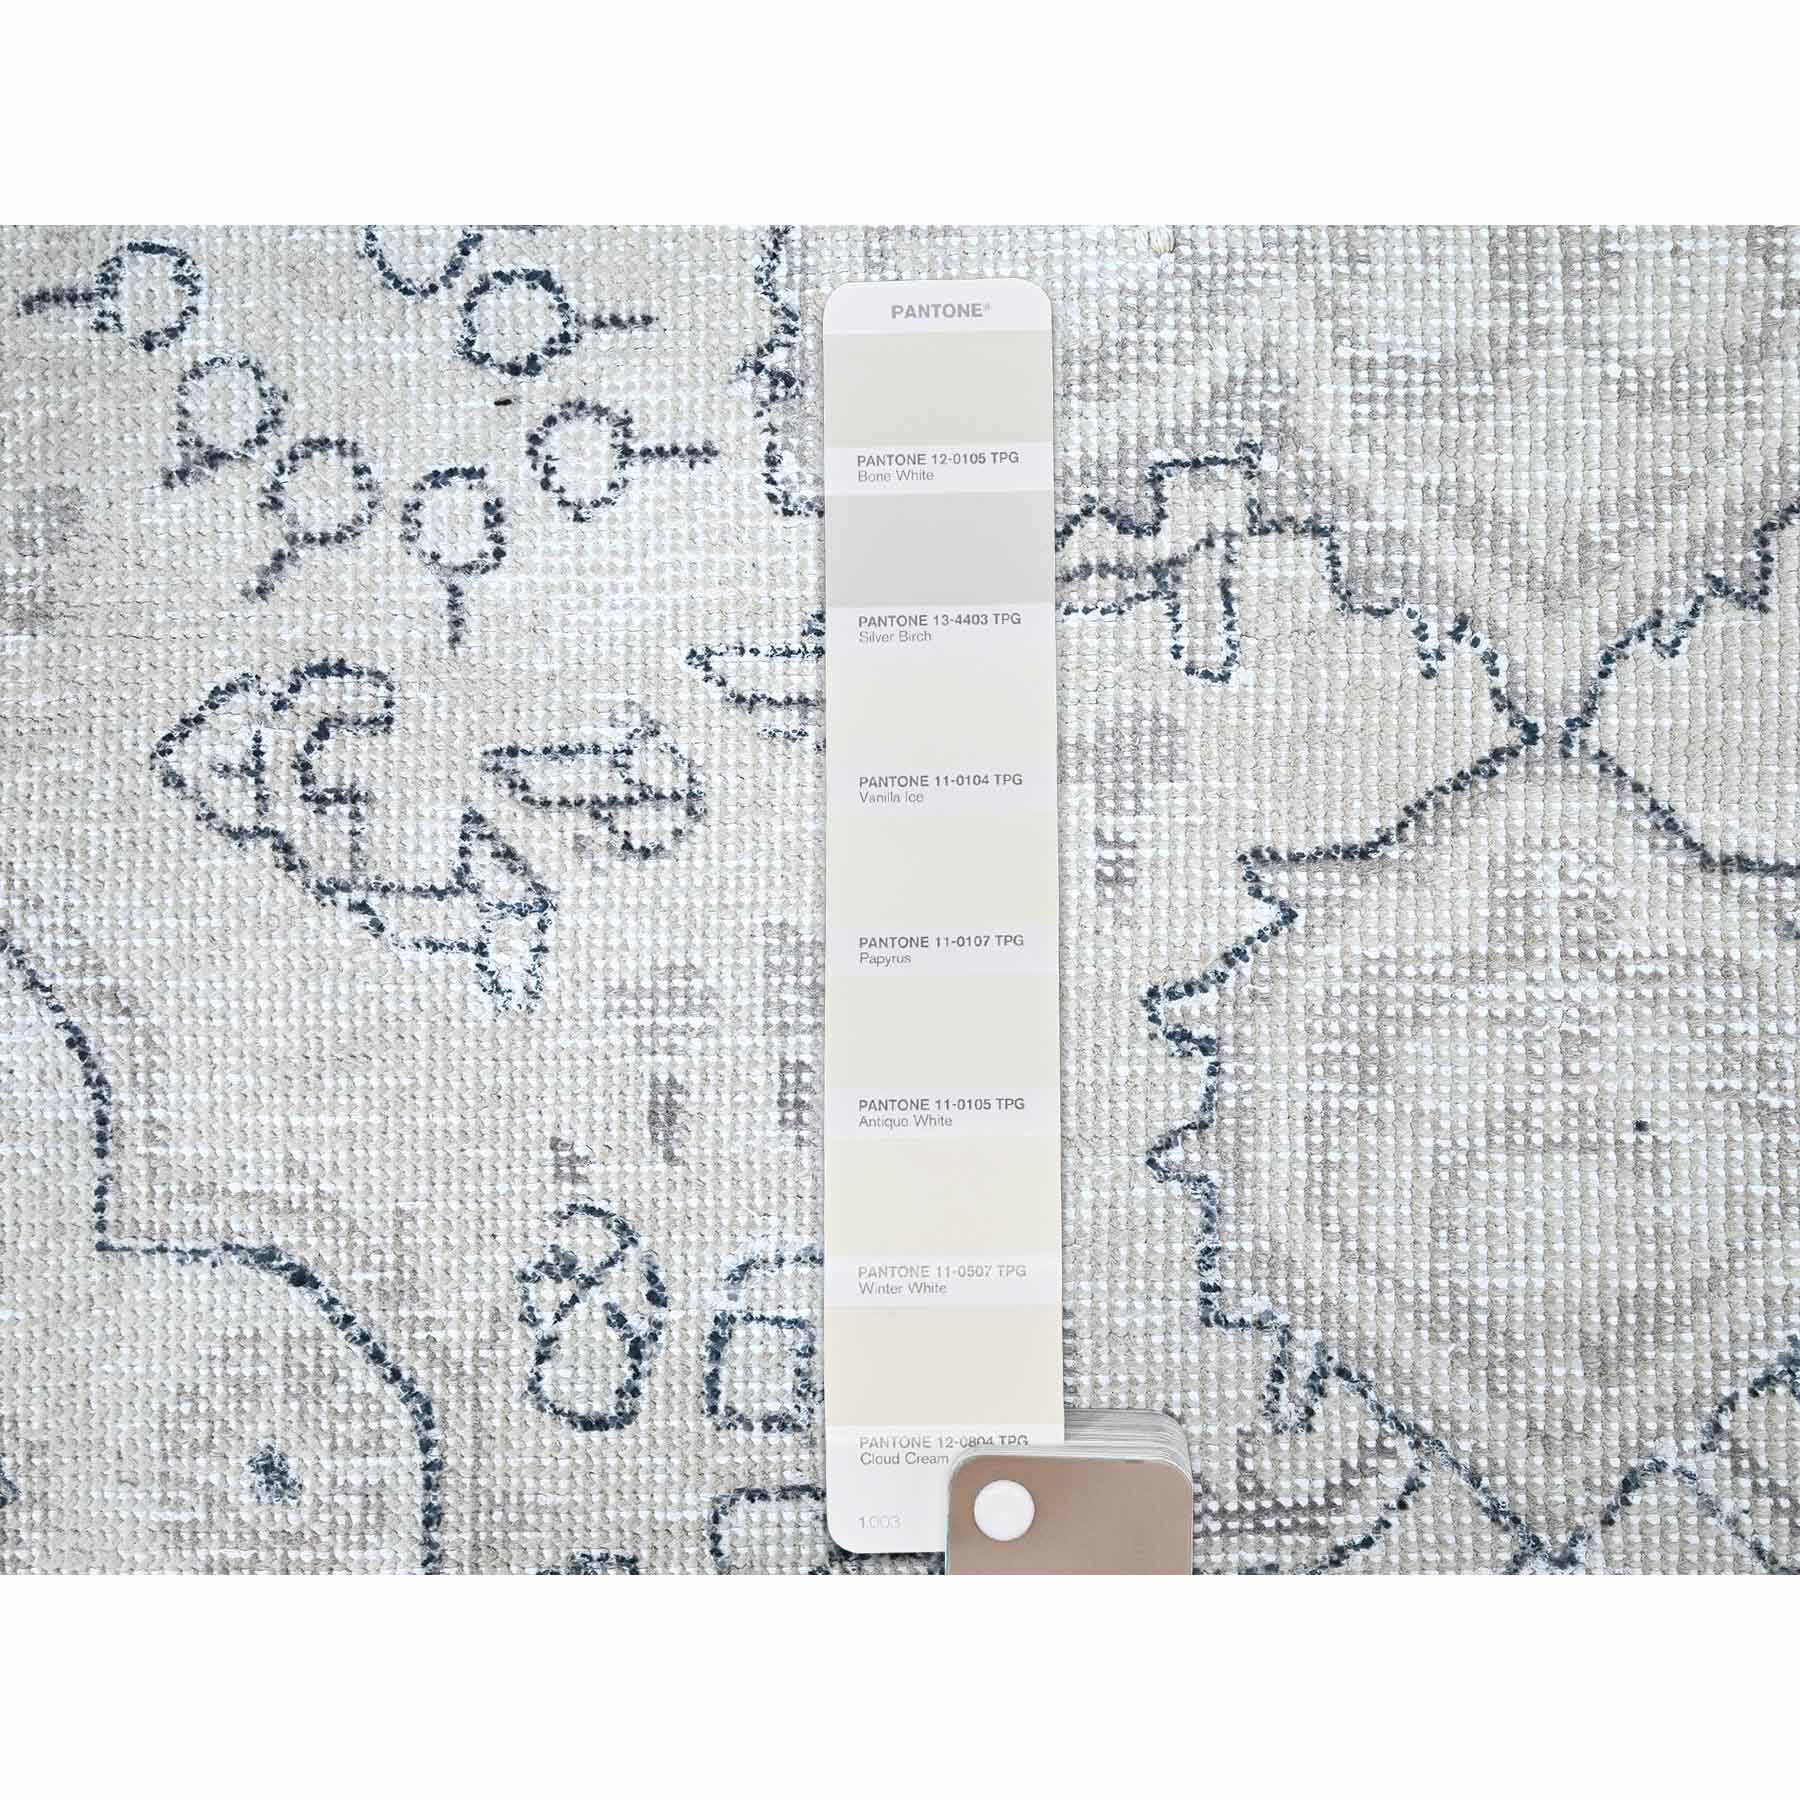 Overdyed-Vintage-Hand-Knotted-Rug-427765